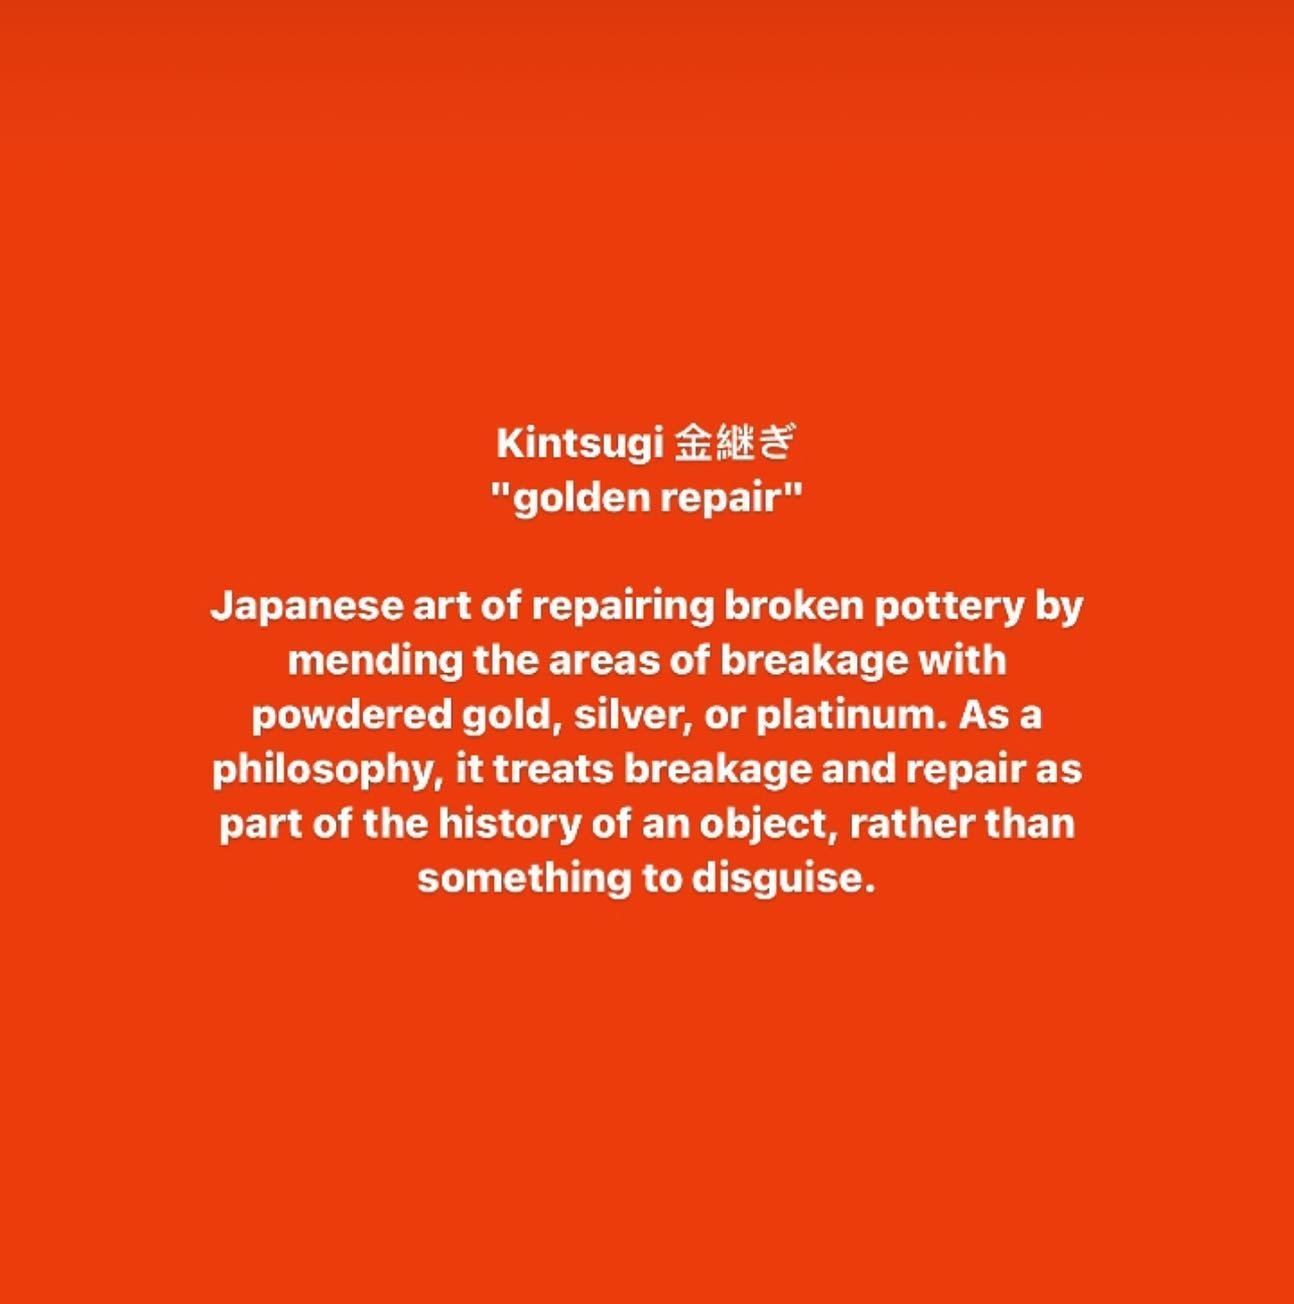 Kintsugi 金繸去
&quot;golden repair&quot;
Japanese art of repairing broken pottery by mending the areas of breakage with powdered gold, silver, or platinum. As a philosophy, it treats breakage and repair as part of the history of an object, rather than 